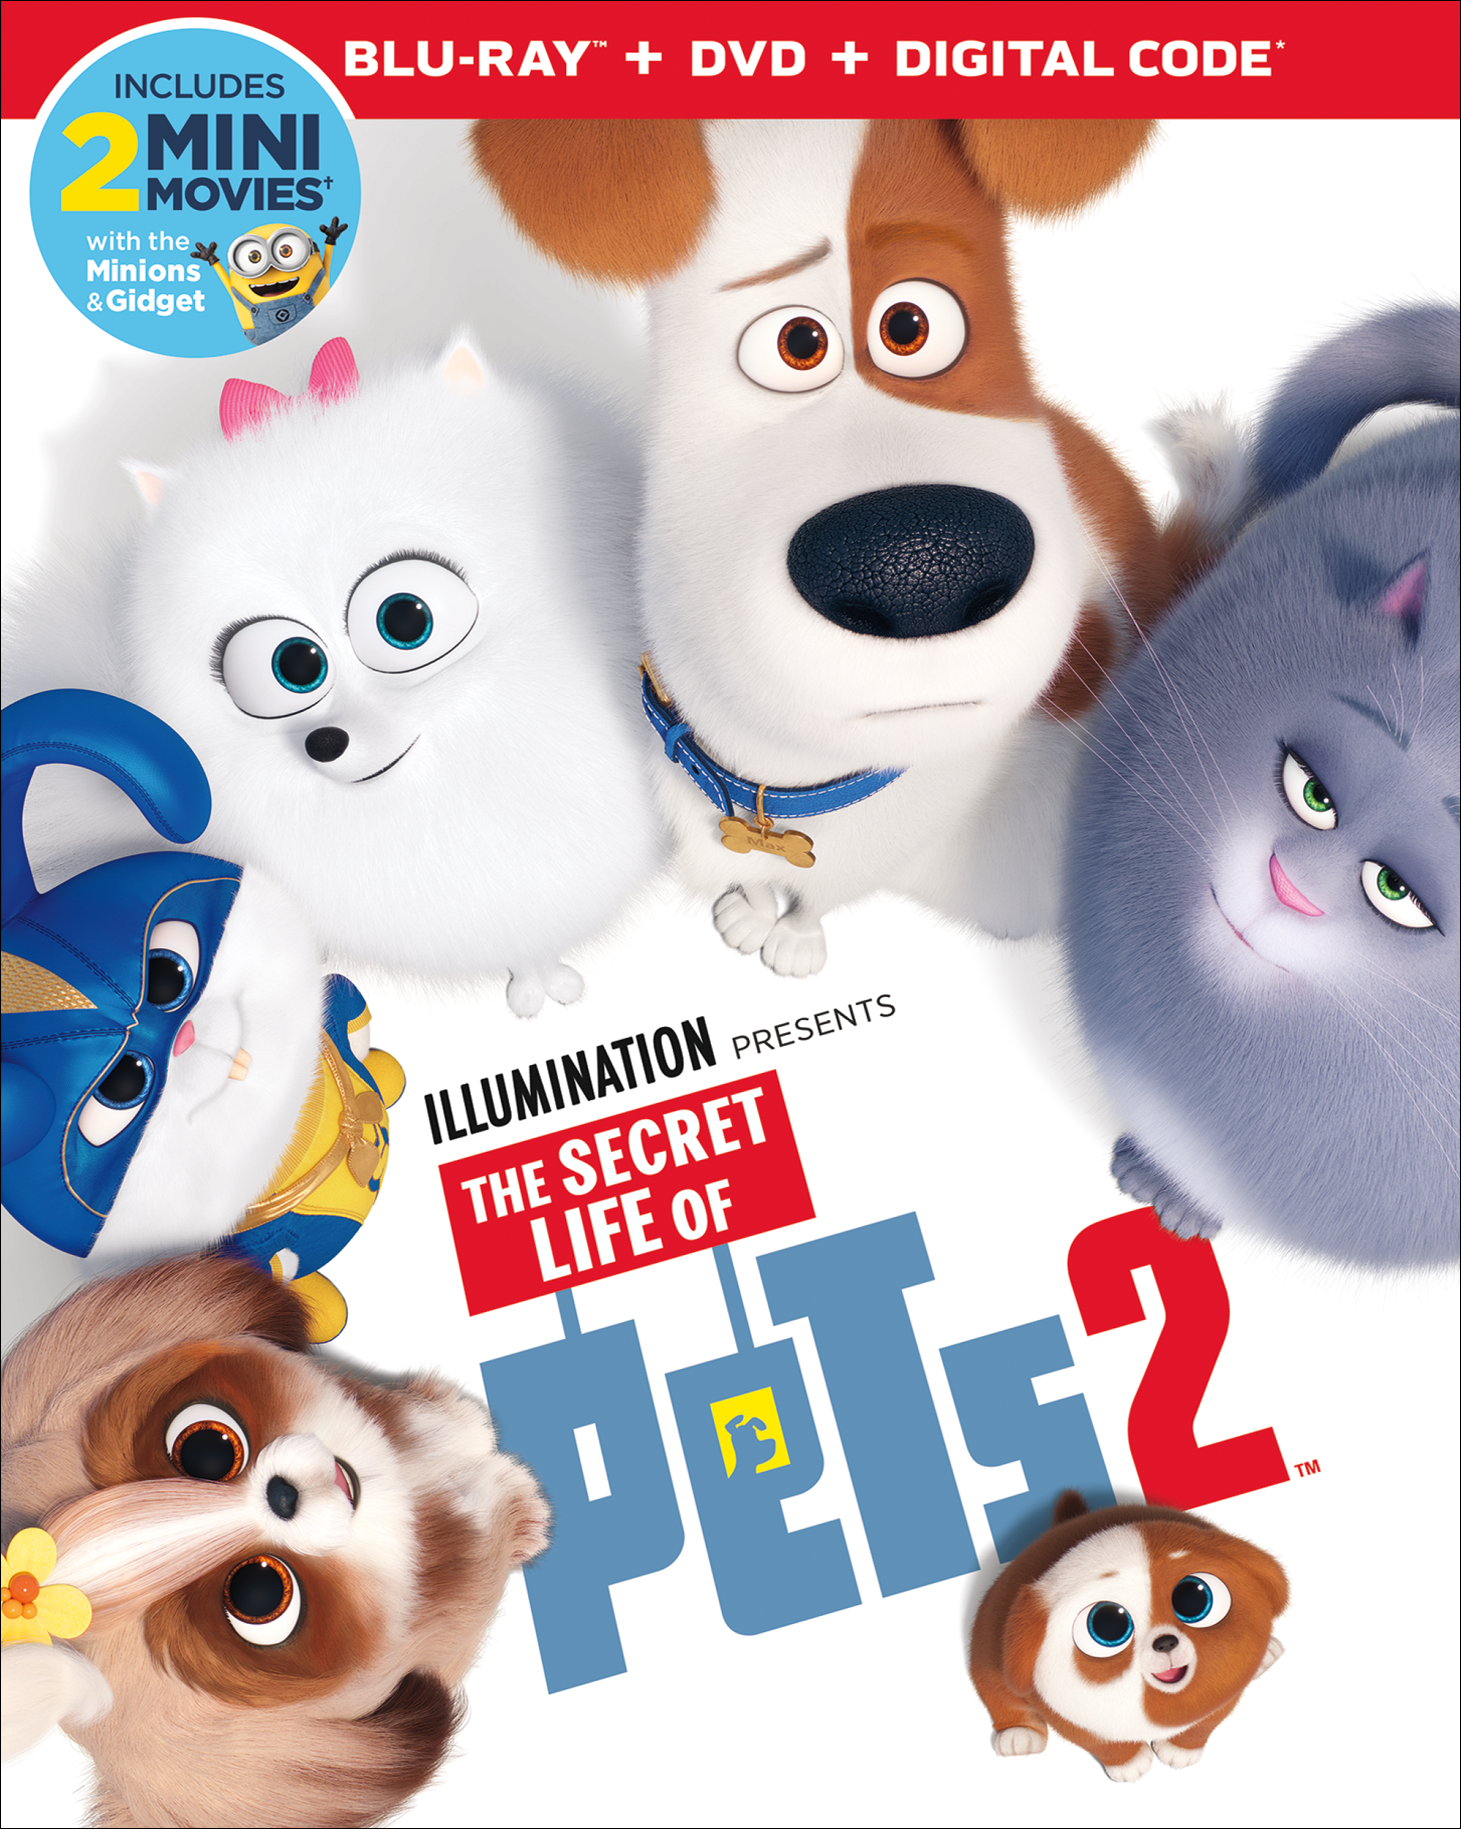 The The Secret Life Of Pets (English) Full Movie Download Utorrent